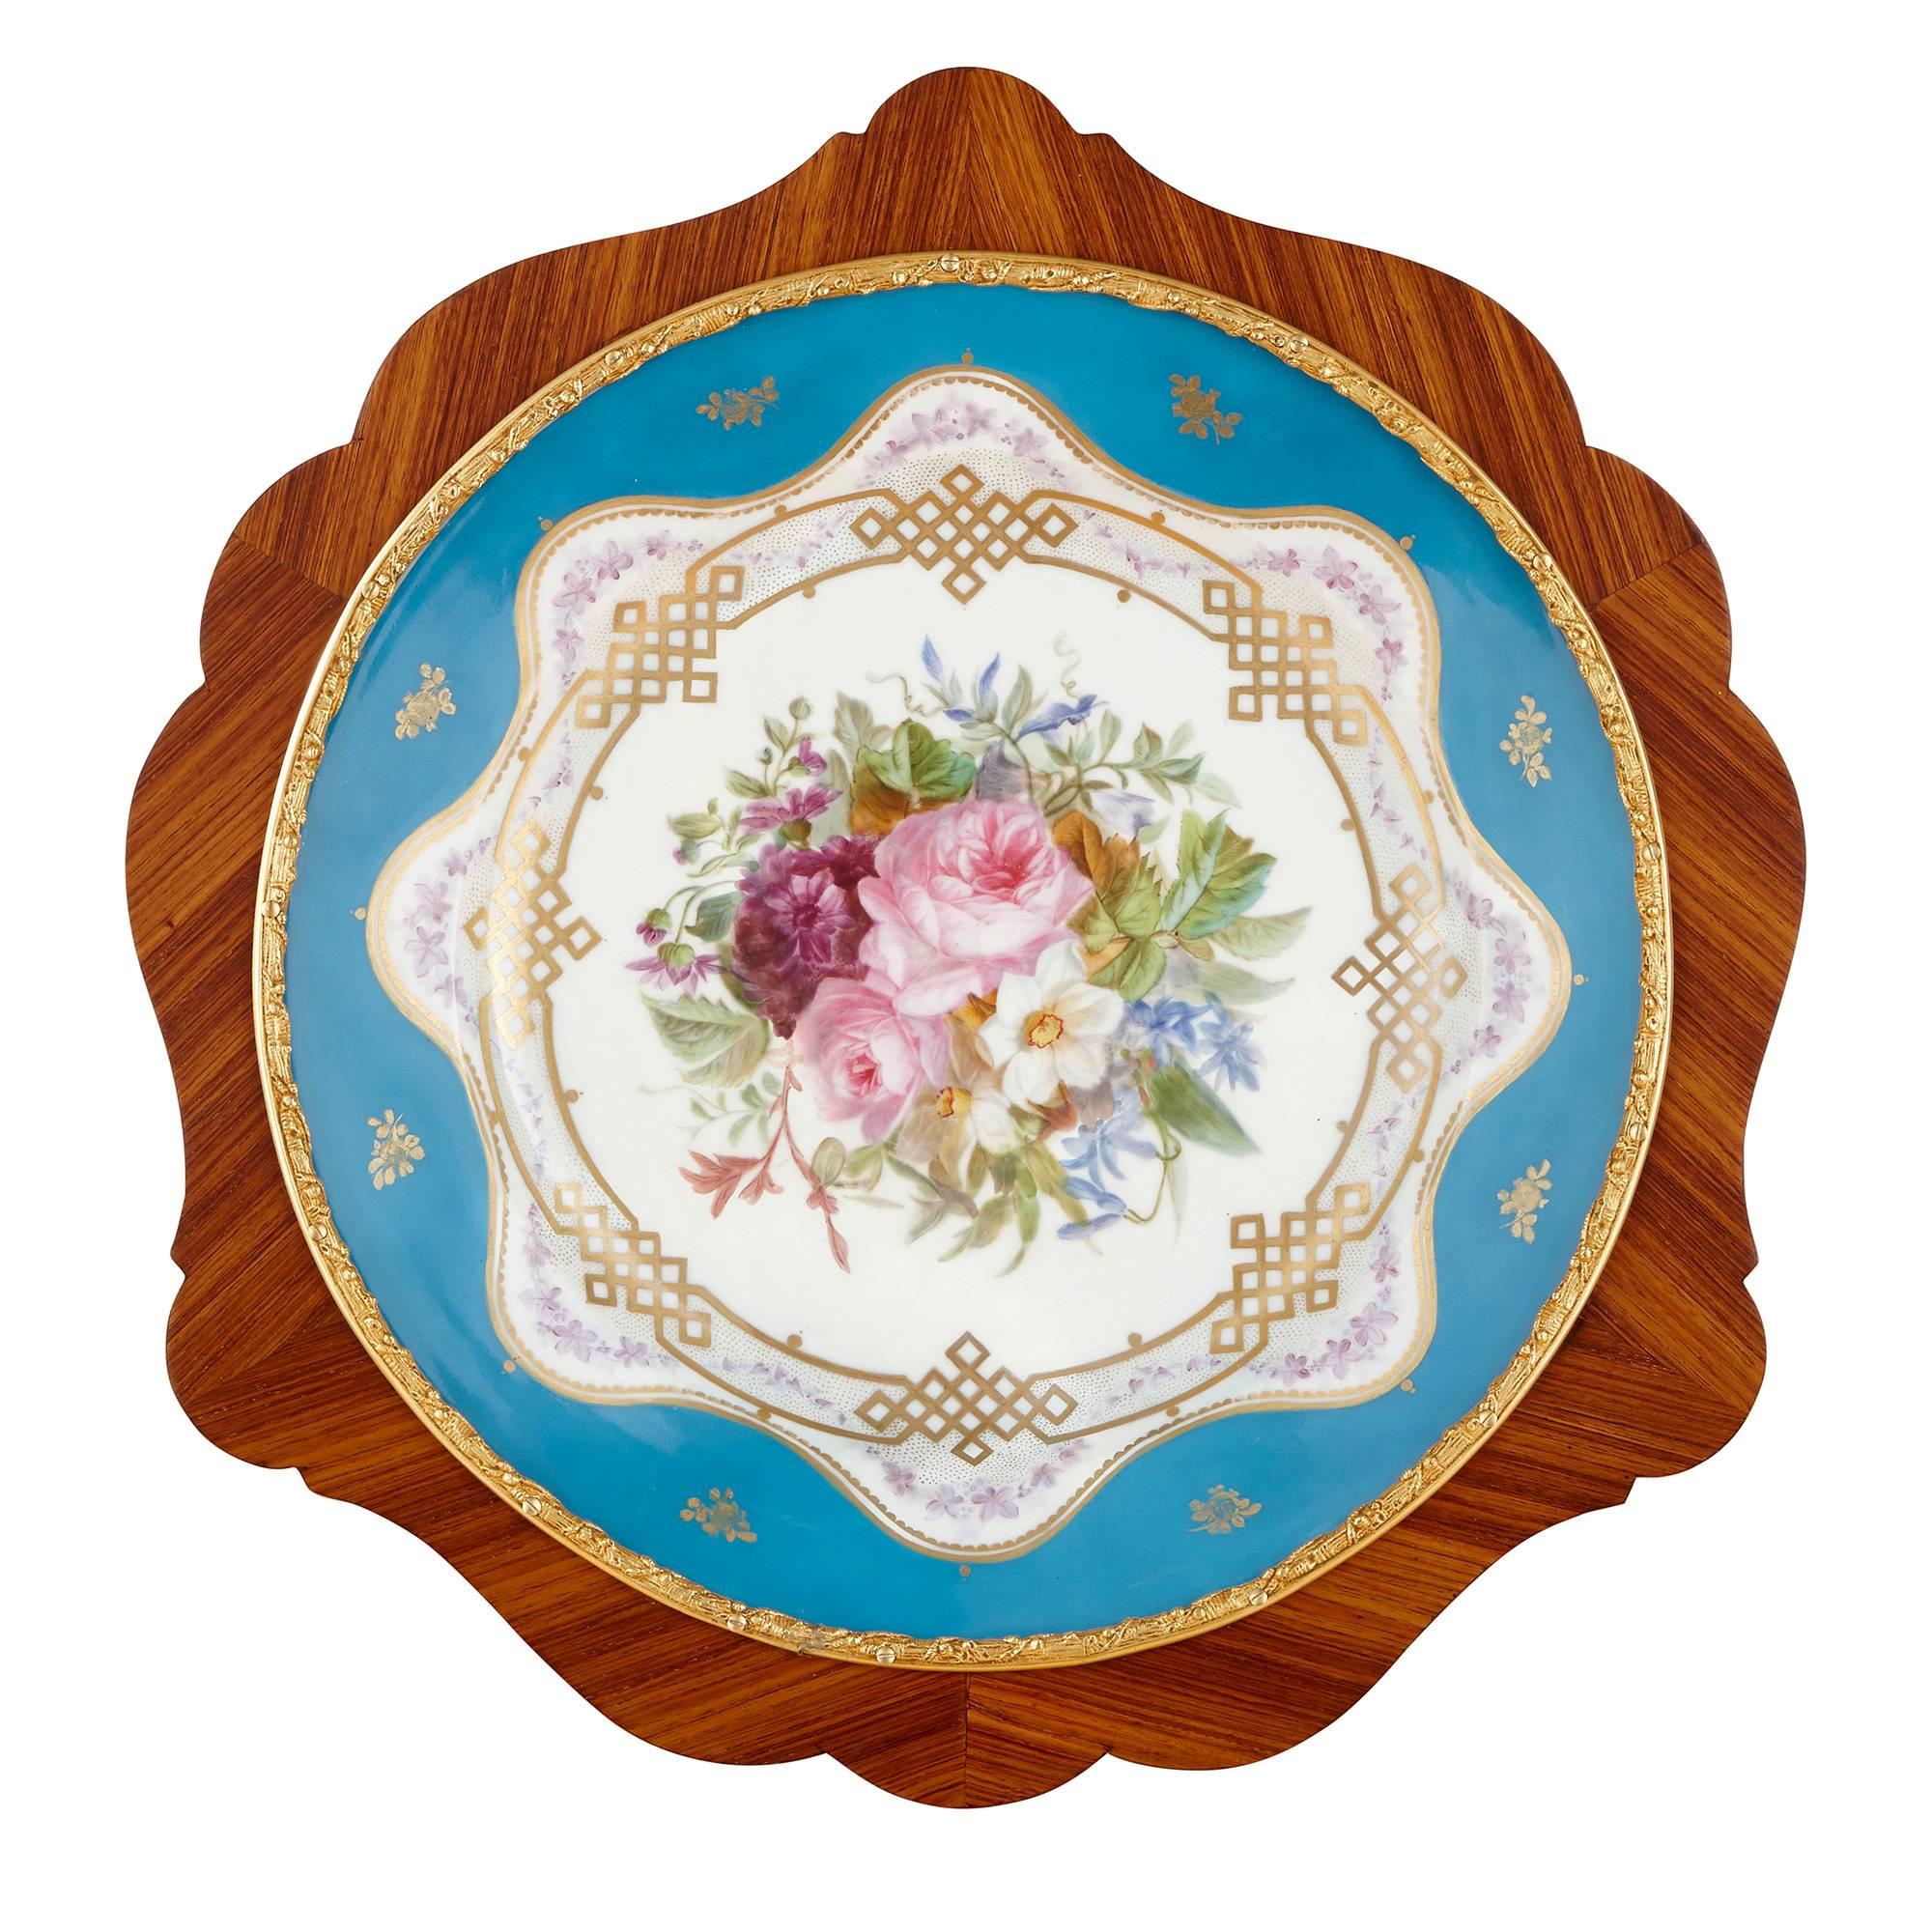 Set with a large central circular turquoise ground painted porcelain plaque depicting flowers, the wooden frame set with a beaded ormolu border and further scrolling ormolu decorations, leading to three scrolling legs joined in the centre.

This